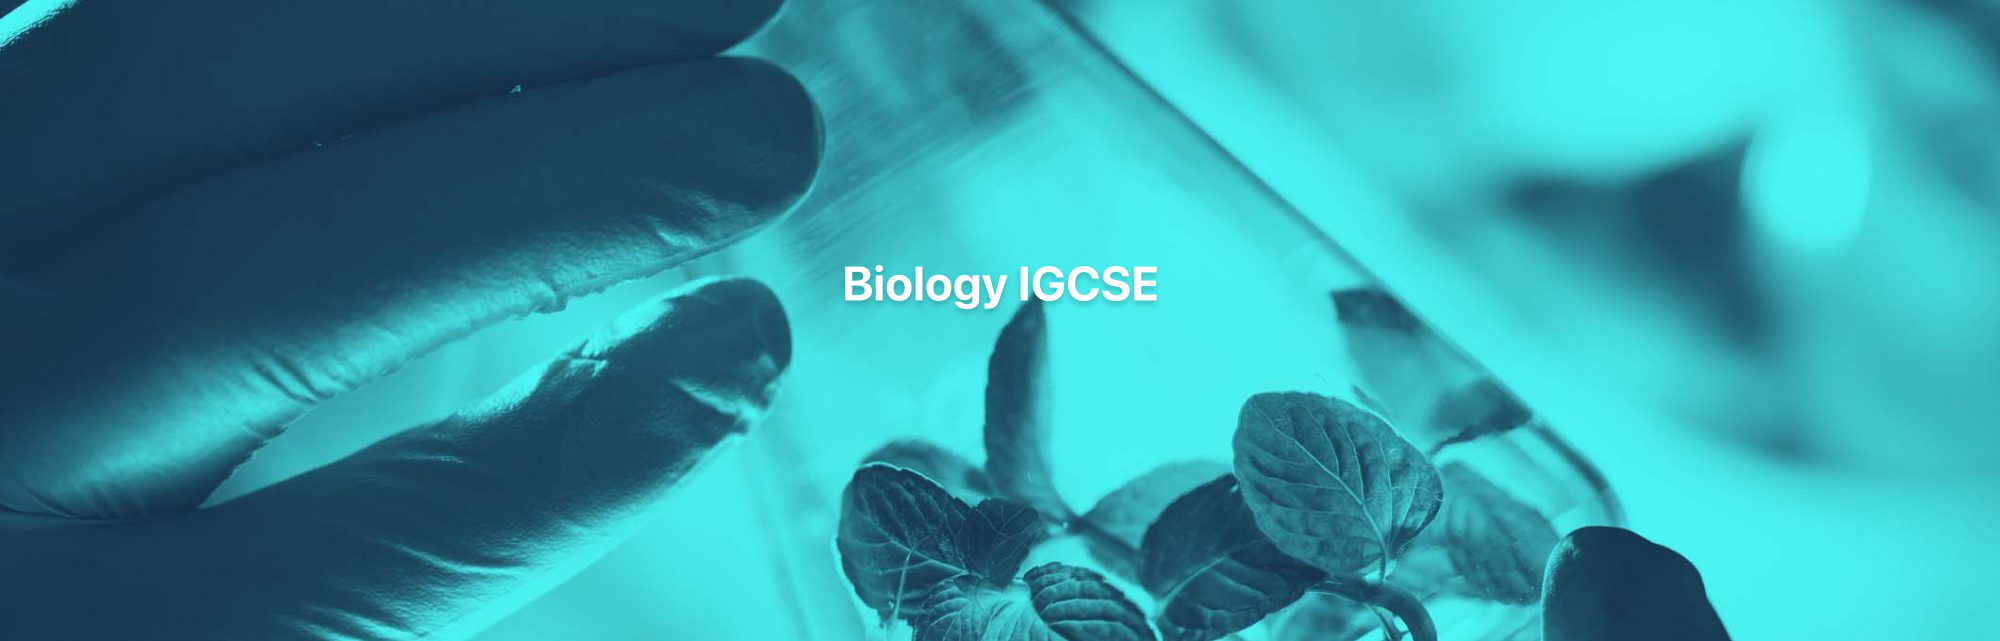 Biology IGCSE Distance Learning Course by Oxbridge